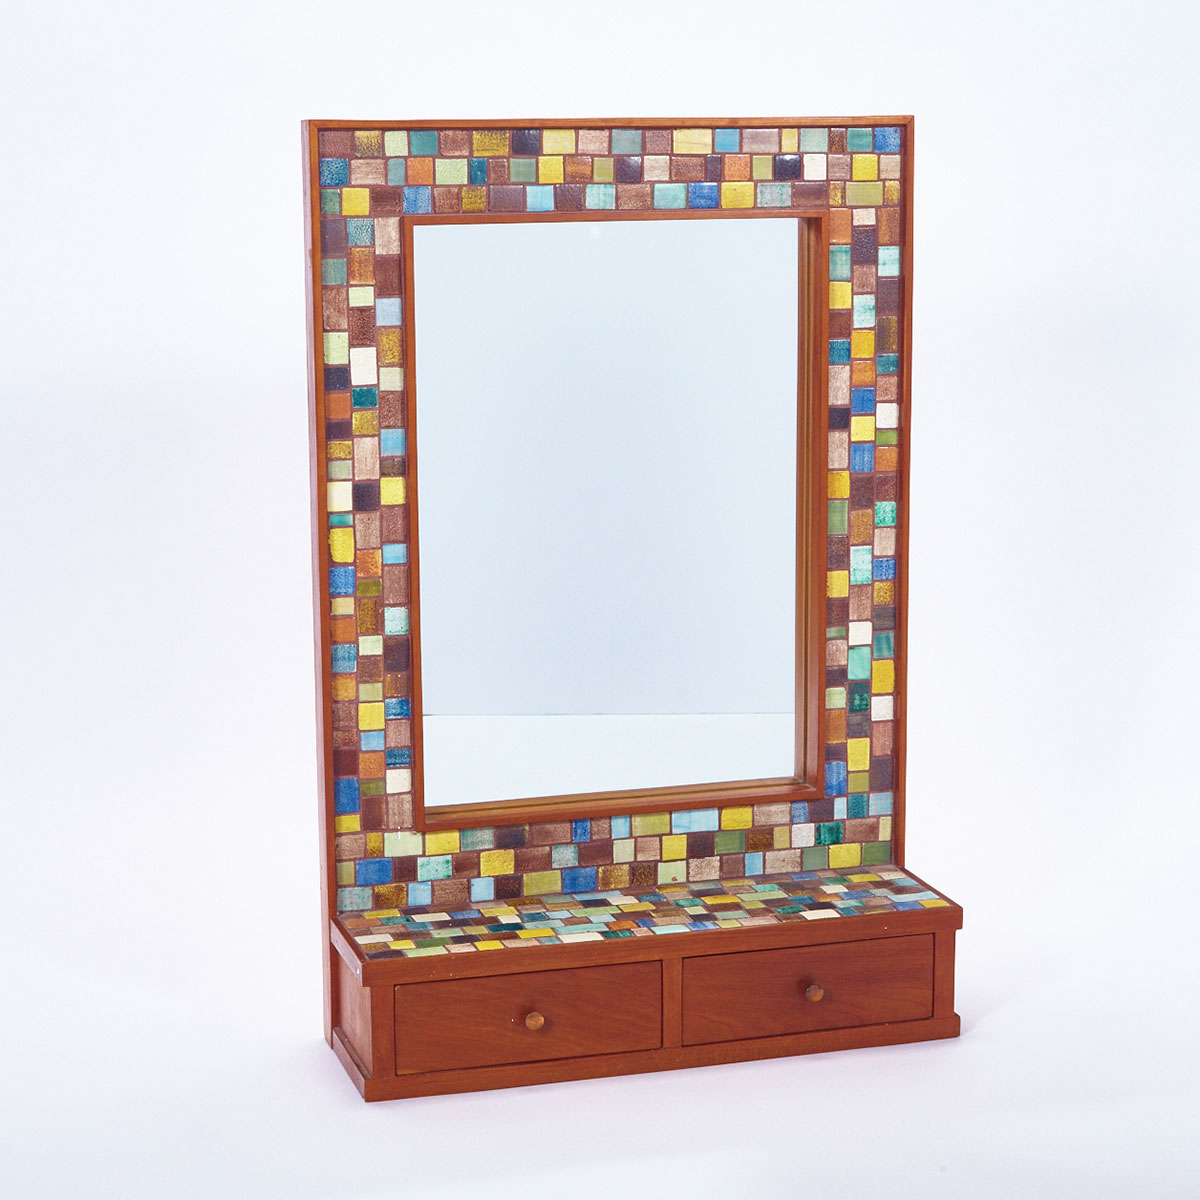 Brooklin Pottery ‘Mosaic’ Tile Mounted Mirror, Theo, Susan and Ben Harlander, 1960s